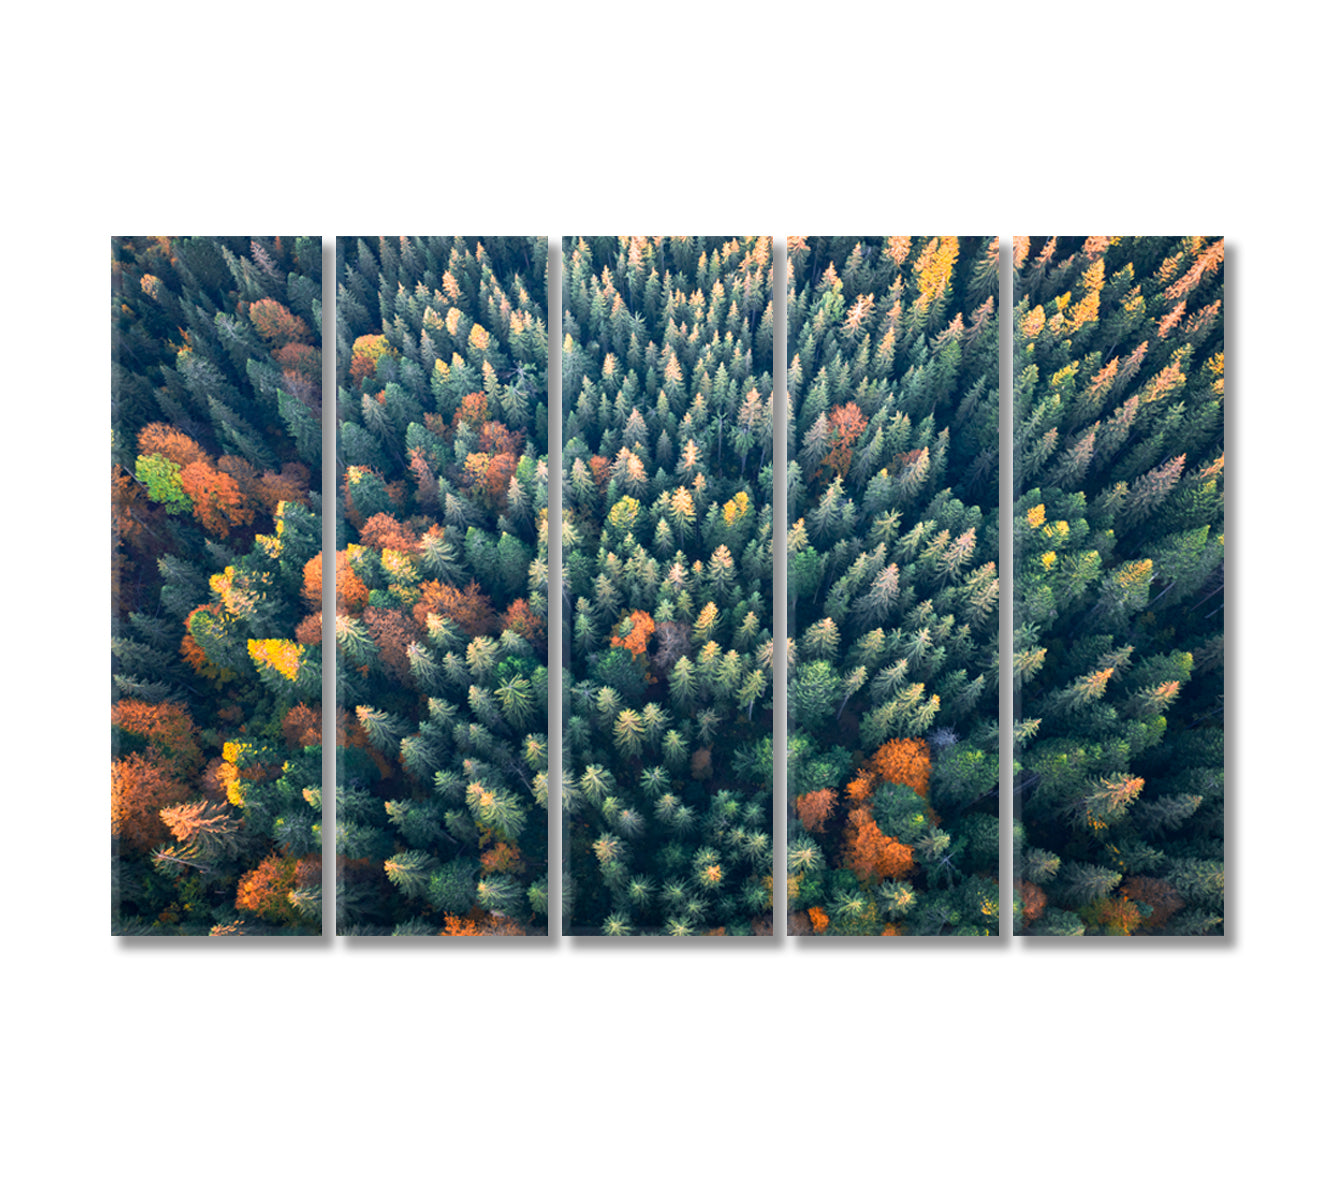 Yellow and Green Autumn Trees in Colorful Forest Canvas Print-Canvas Print-CetArt-5 Panels-36x24 inches-CetArt